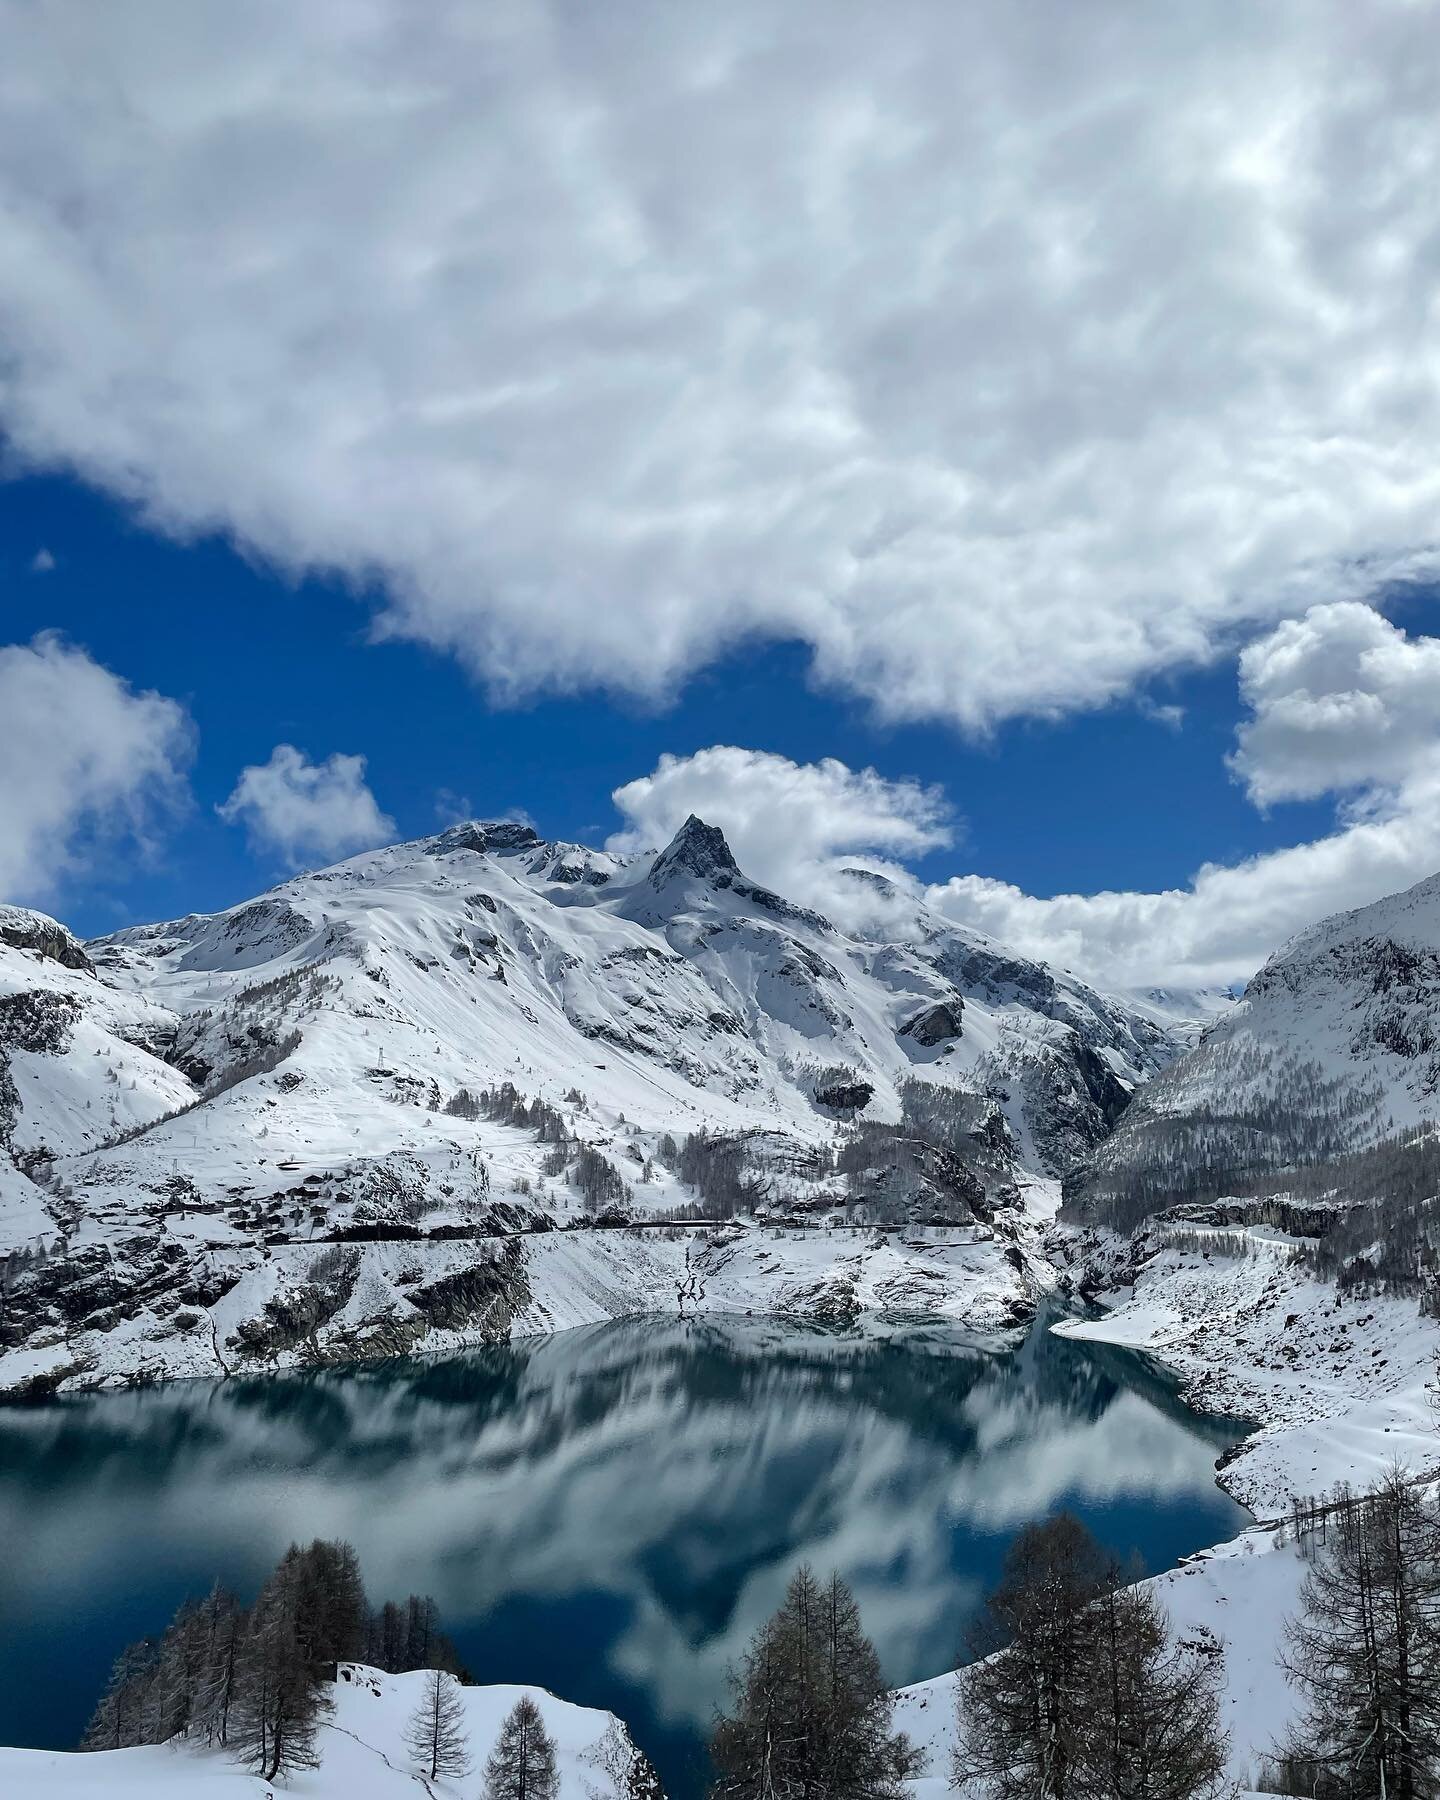 Tignes, France. Breathtaking. We were here a few days ago. I&rsquo;ve not been to Tignes since lockdown. We use to visit twice a year - a week in the summer &amp; a week in the winter. 

The landscape is magnificent, enforces a complete shift in perc